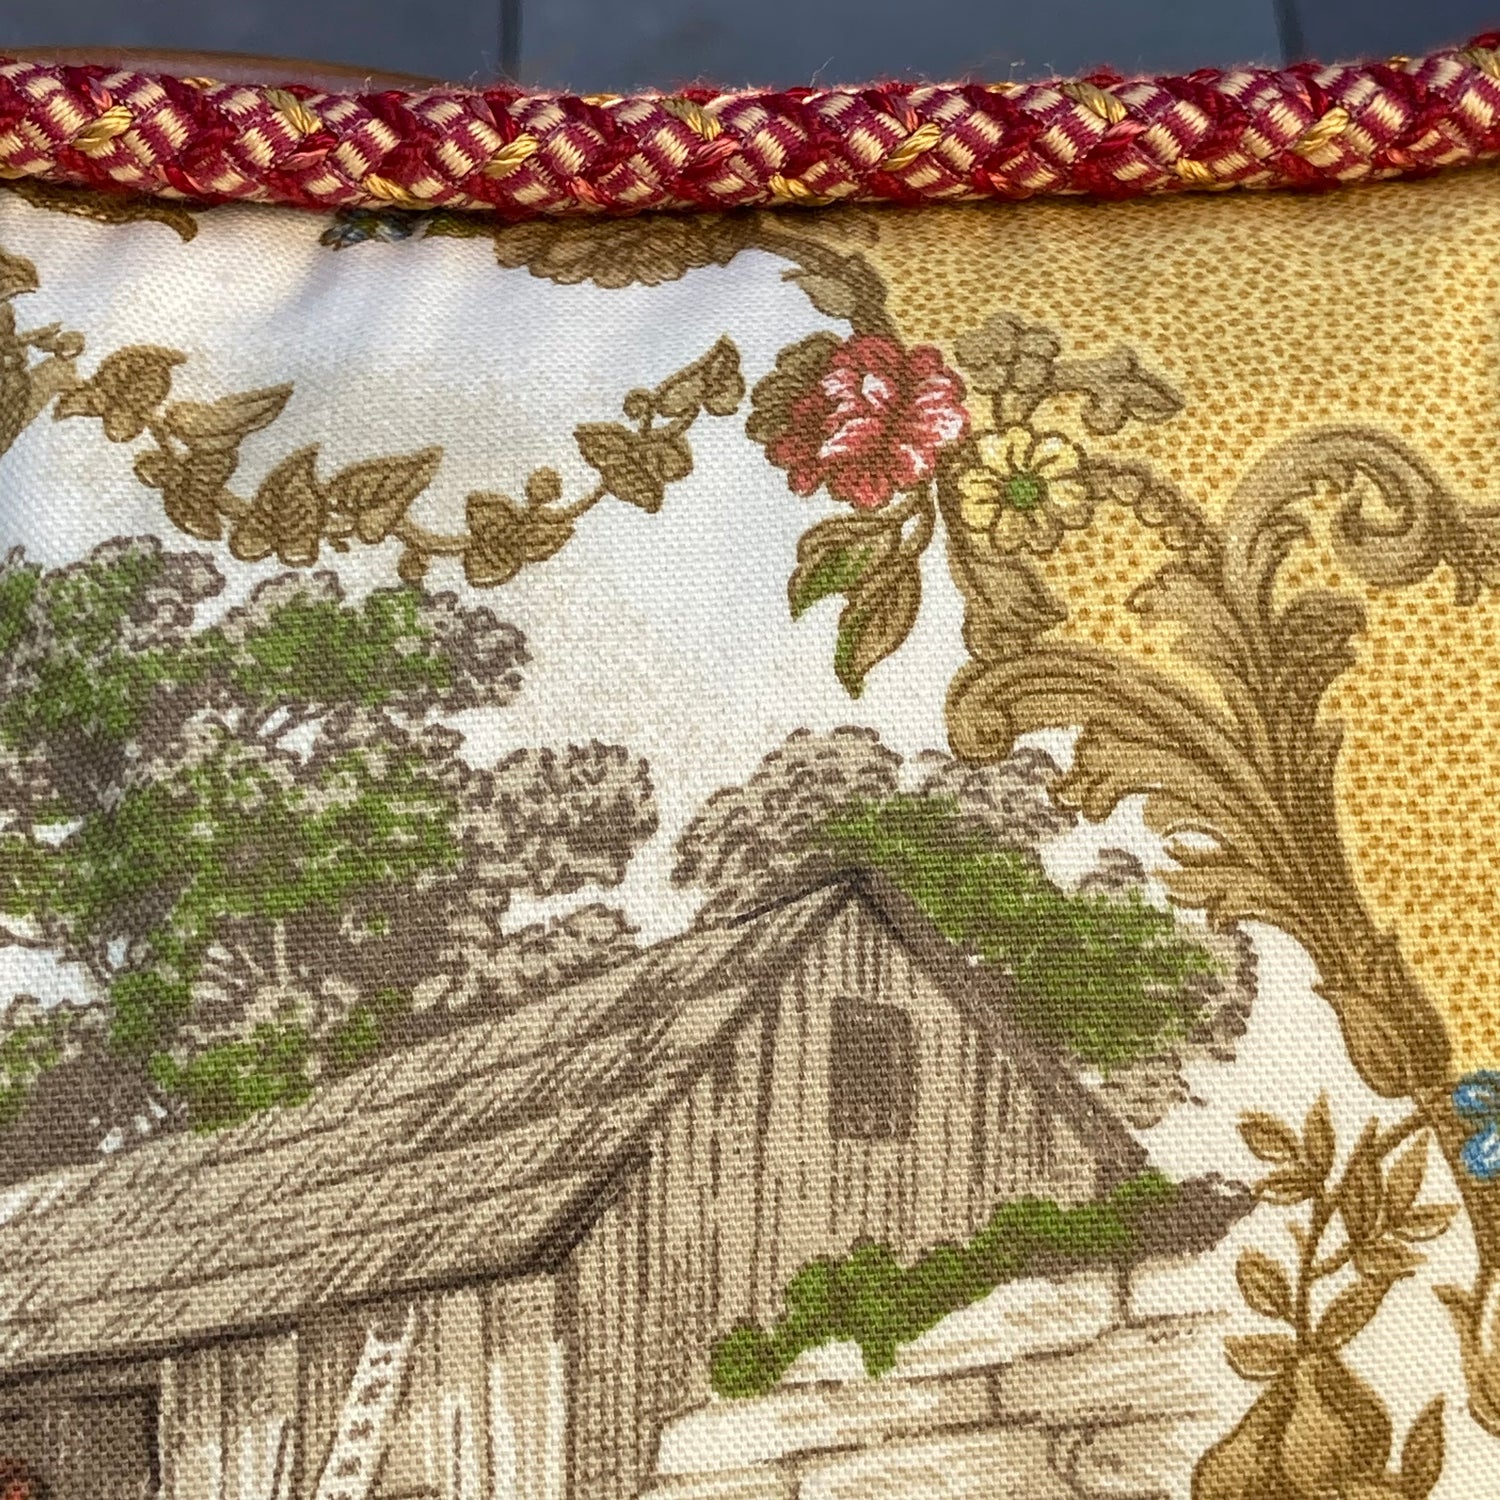 Two French Roosters Pillow Braid Trim Toile in Mustard with Brown Gingham 12 X 16 Rectangle Designer Throw Pillow with Down Feather Insert